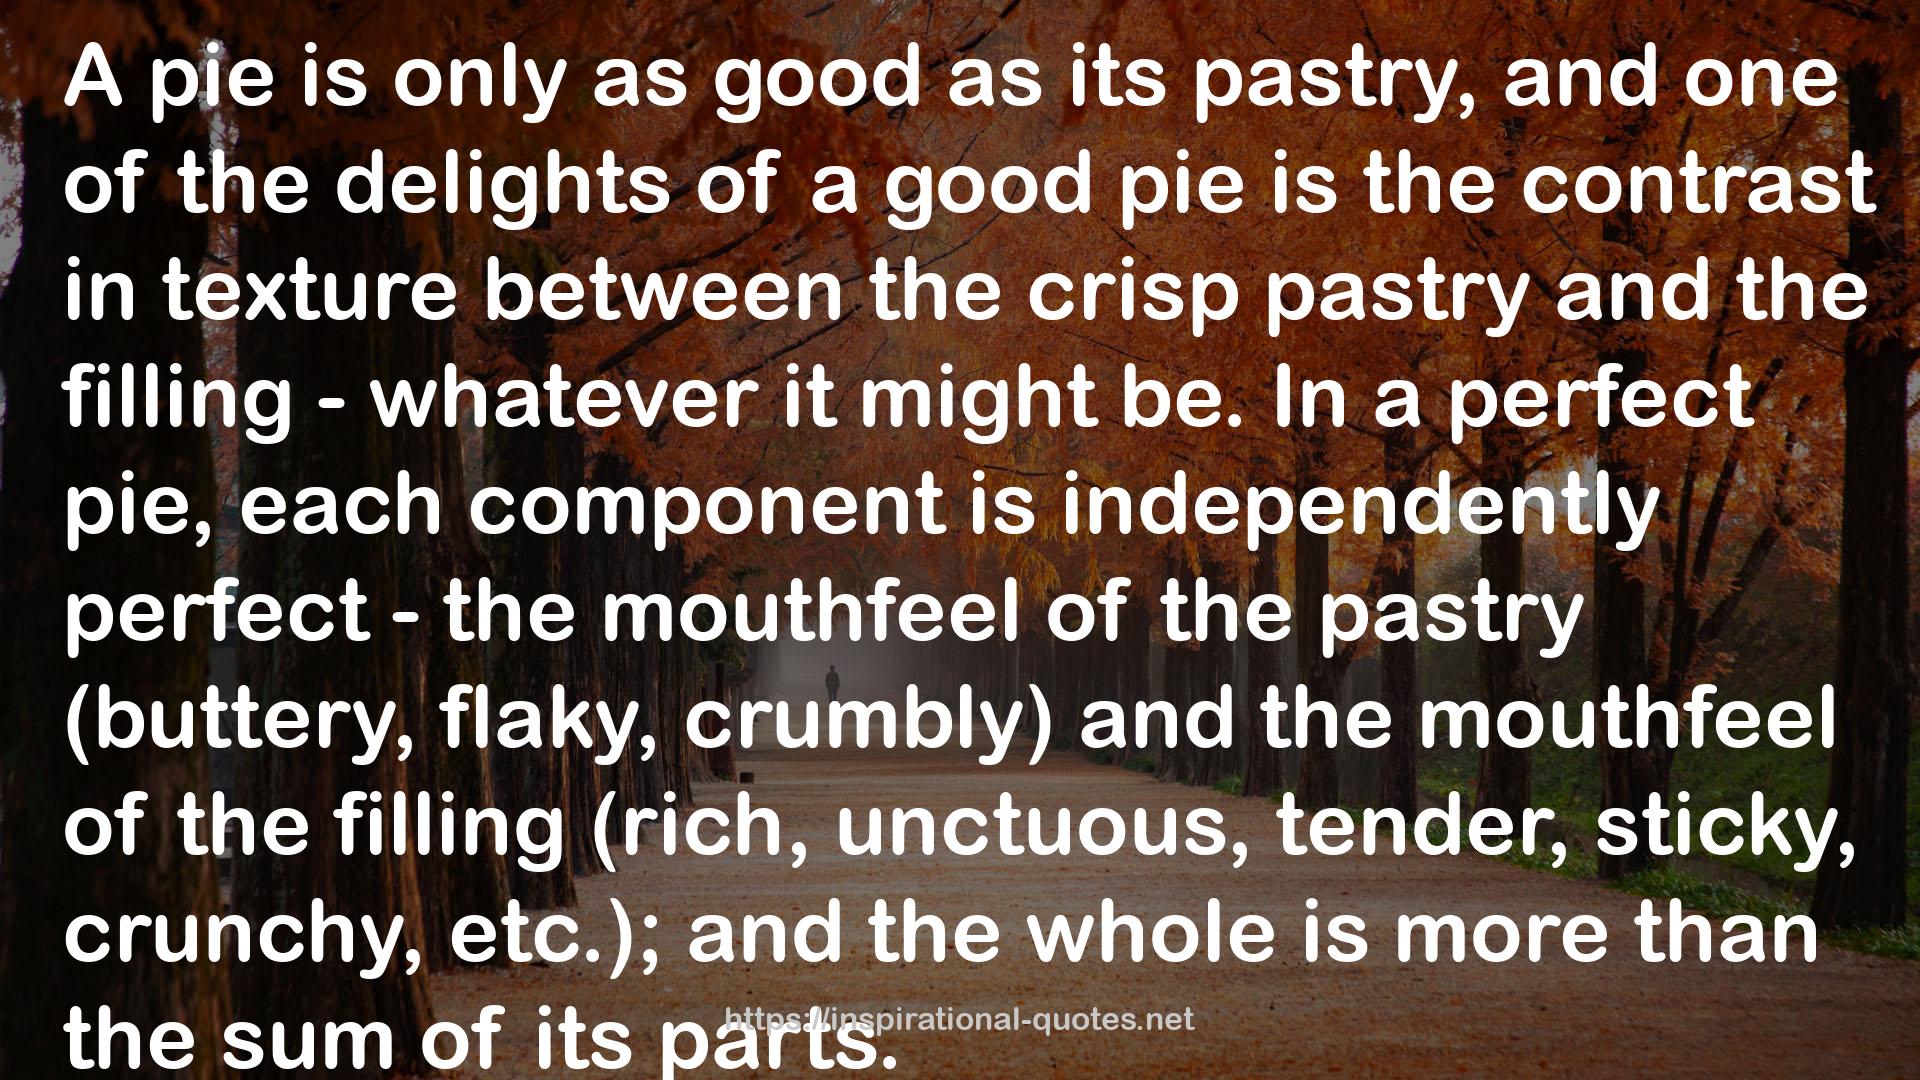 Pie: A Global History QUOTES